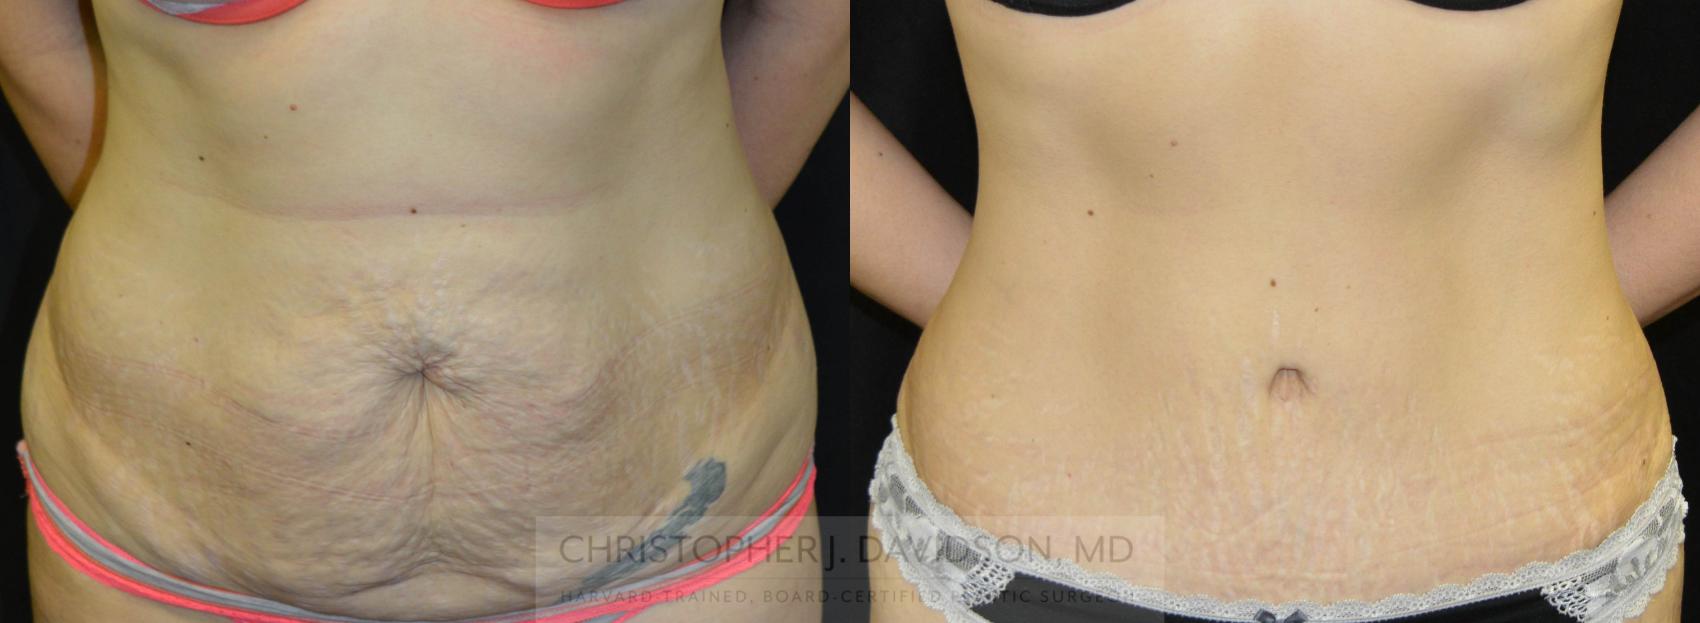 Tummy Tuck (Abdominoplasty) Case 26 Before & After View #1 | Wellesley, MA | Christopher J. Davidson, MD